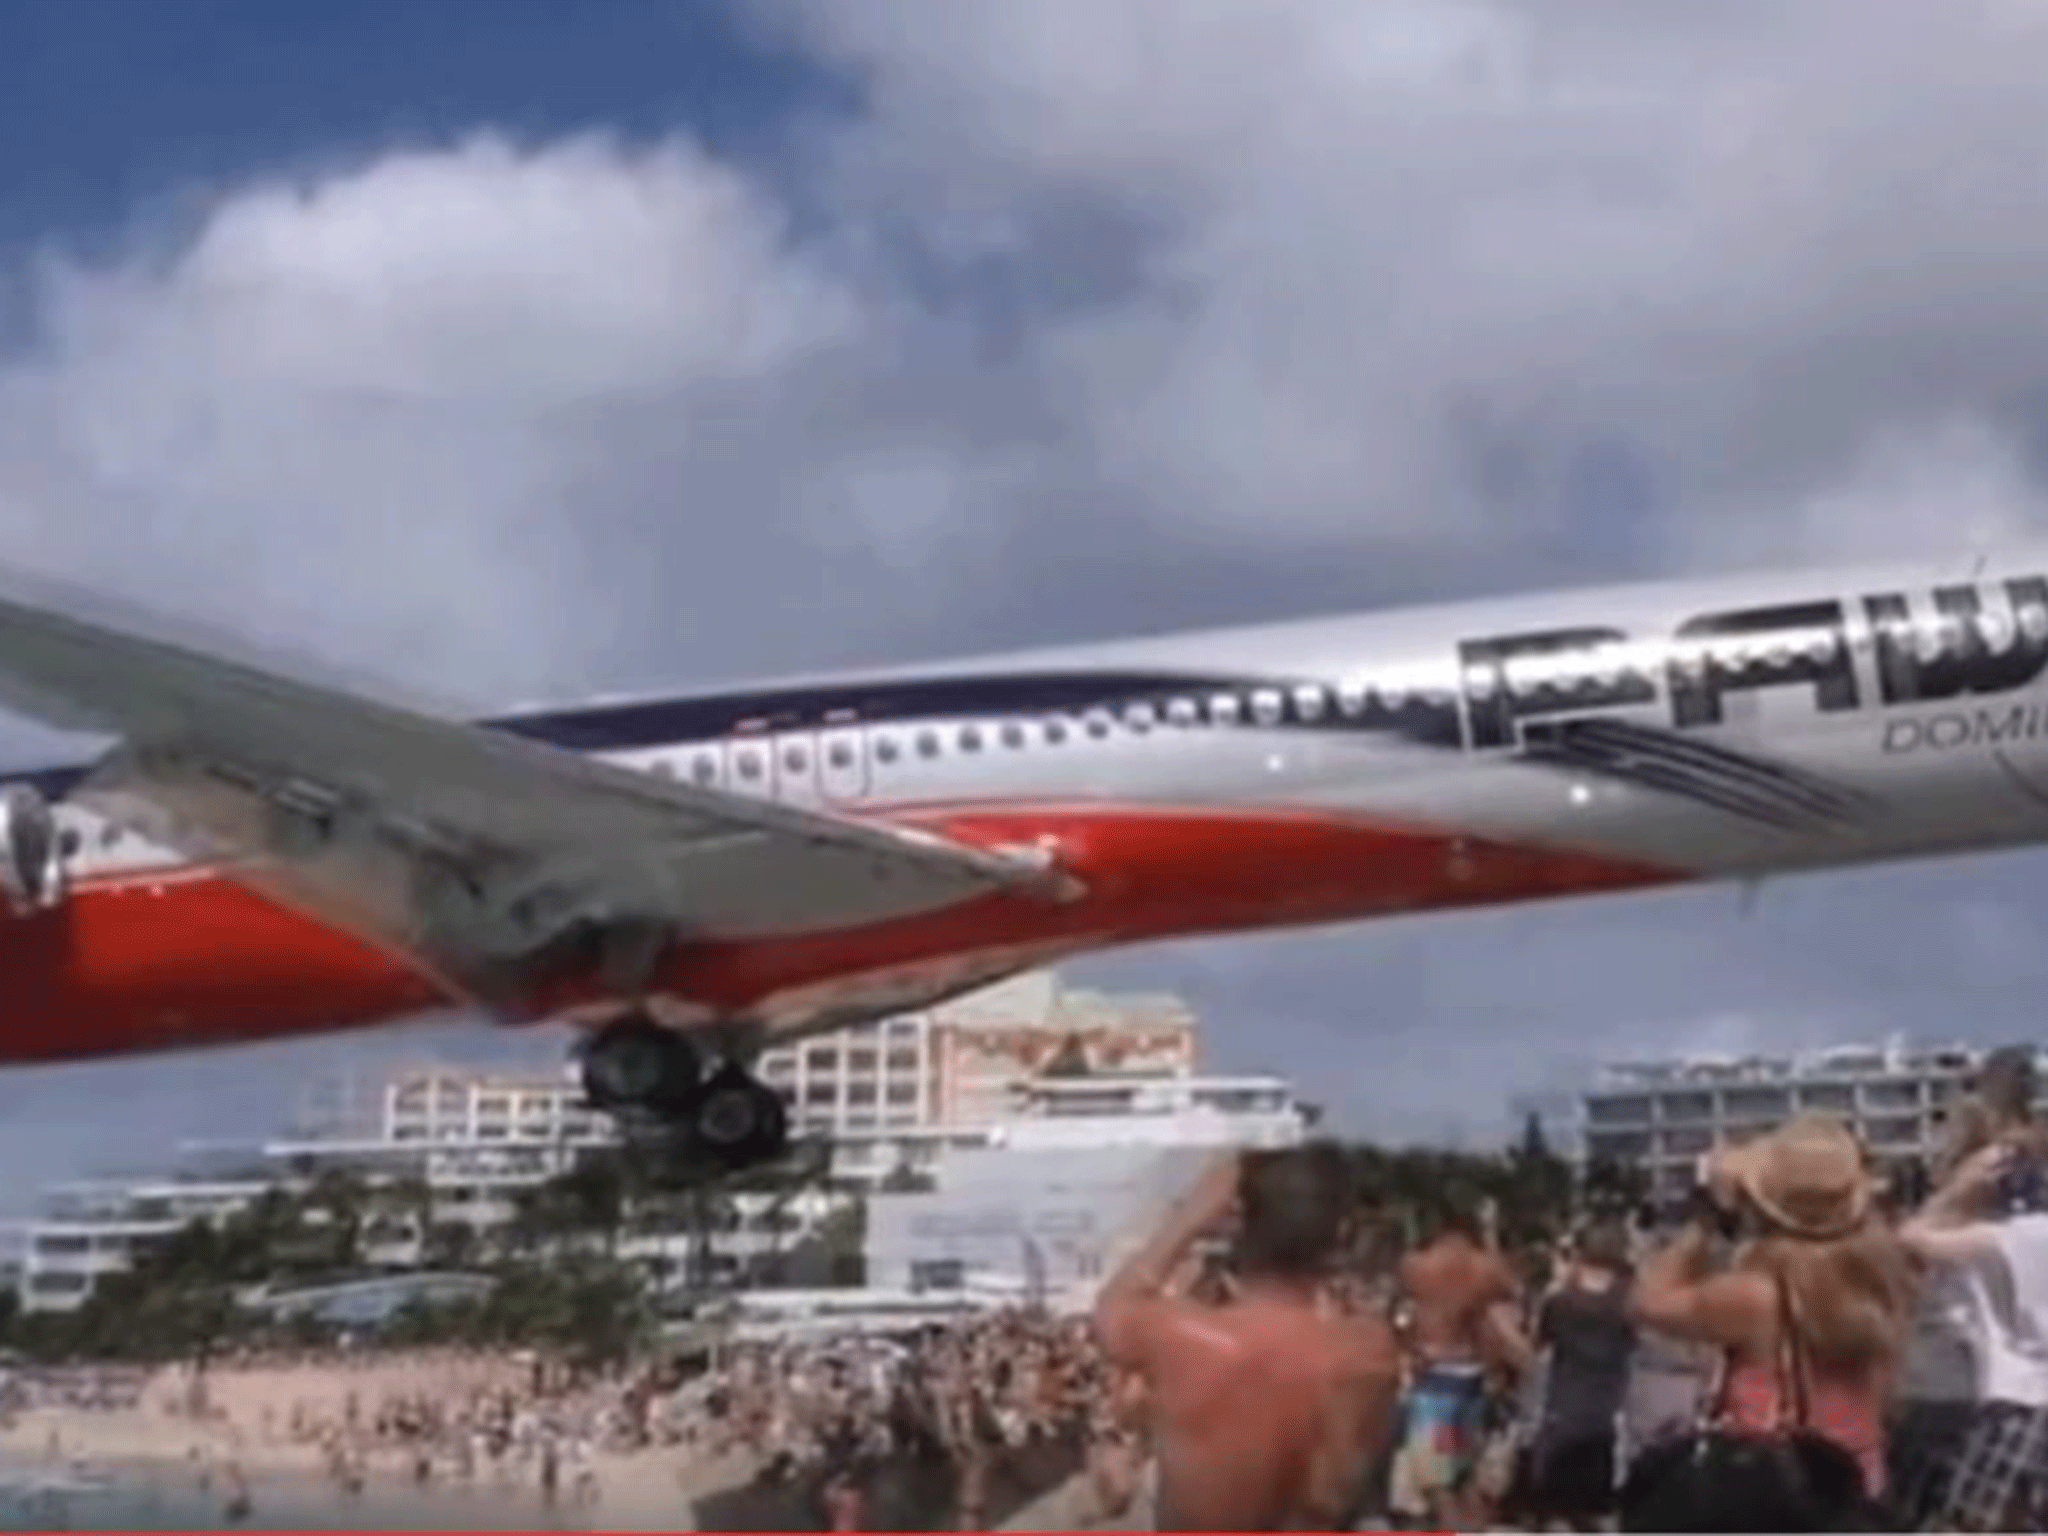 Plane Flies Yards Above Tourists Heads In Video Shot At